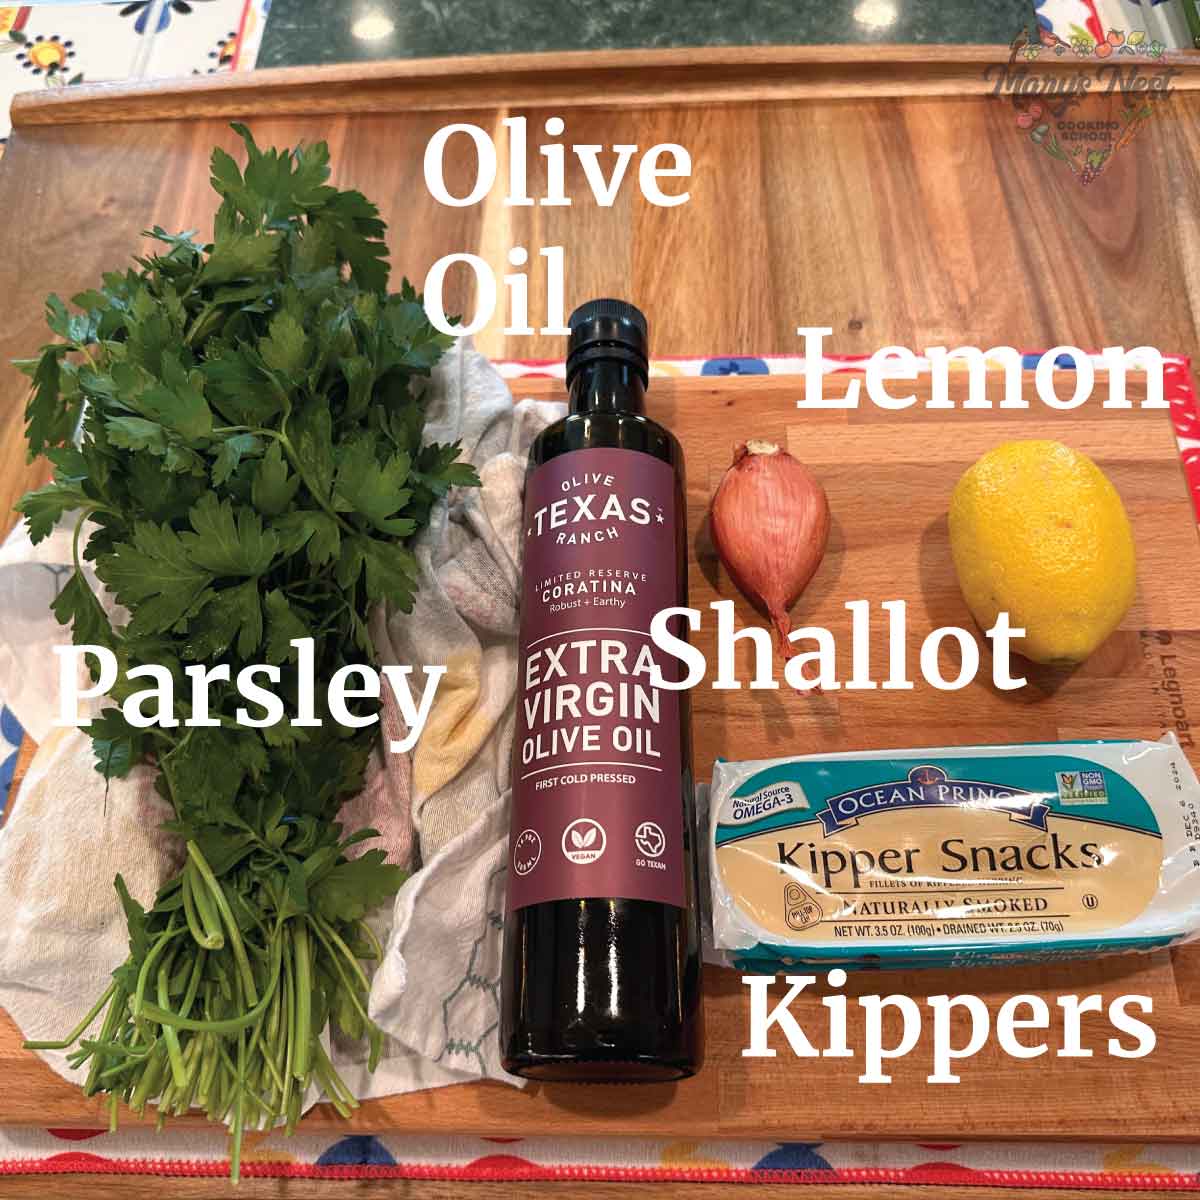 Kippers Recipe Ingredients showing parsley, olive oil, lemon, shallot, and kippers.